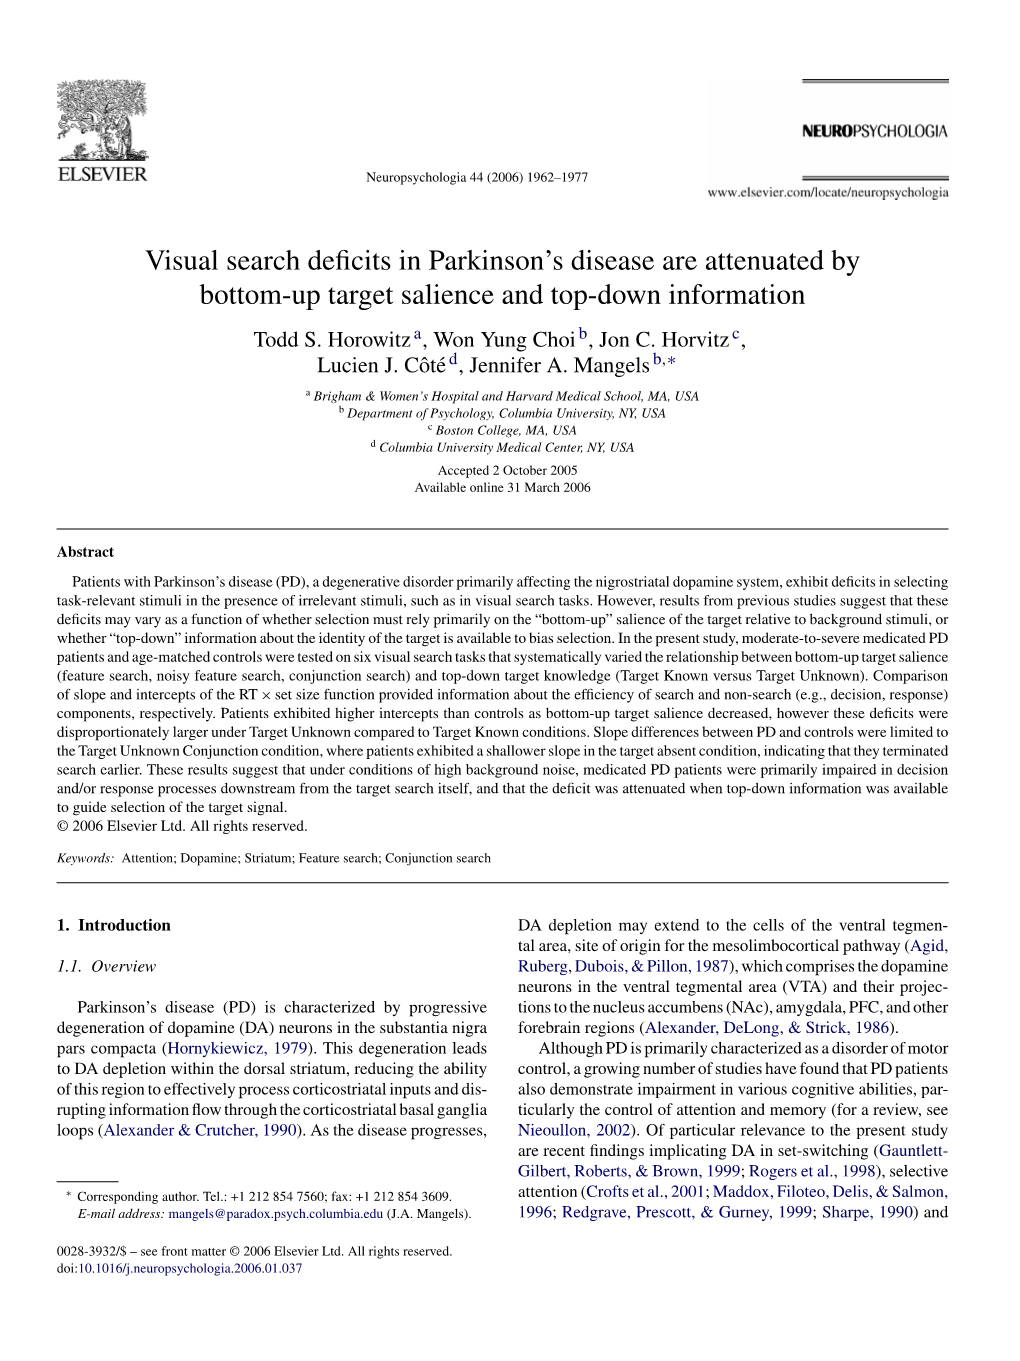 Visual Search Deficits in Parkinson's Disease Are Attenuated by Bottom-Up Target Salience and Top-Down Information